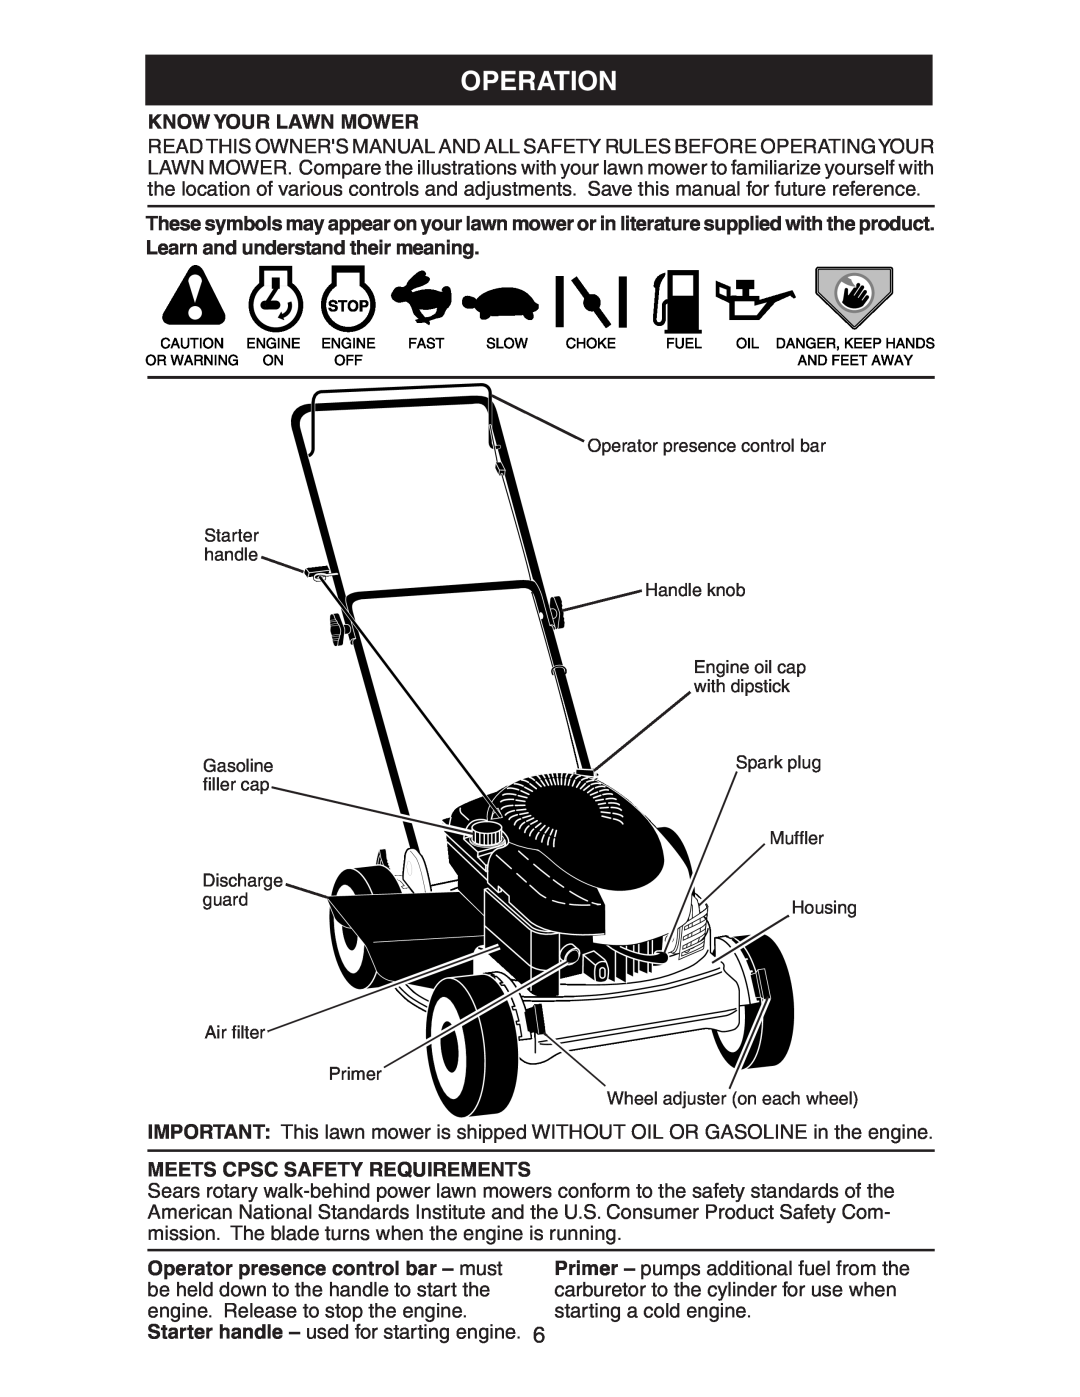 Poulan 199128, 224110X92E1, 225114X92E1 manual Operation, Know Your Lawn Mower, Meets Cpsc Safety Requirements 